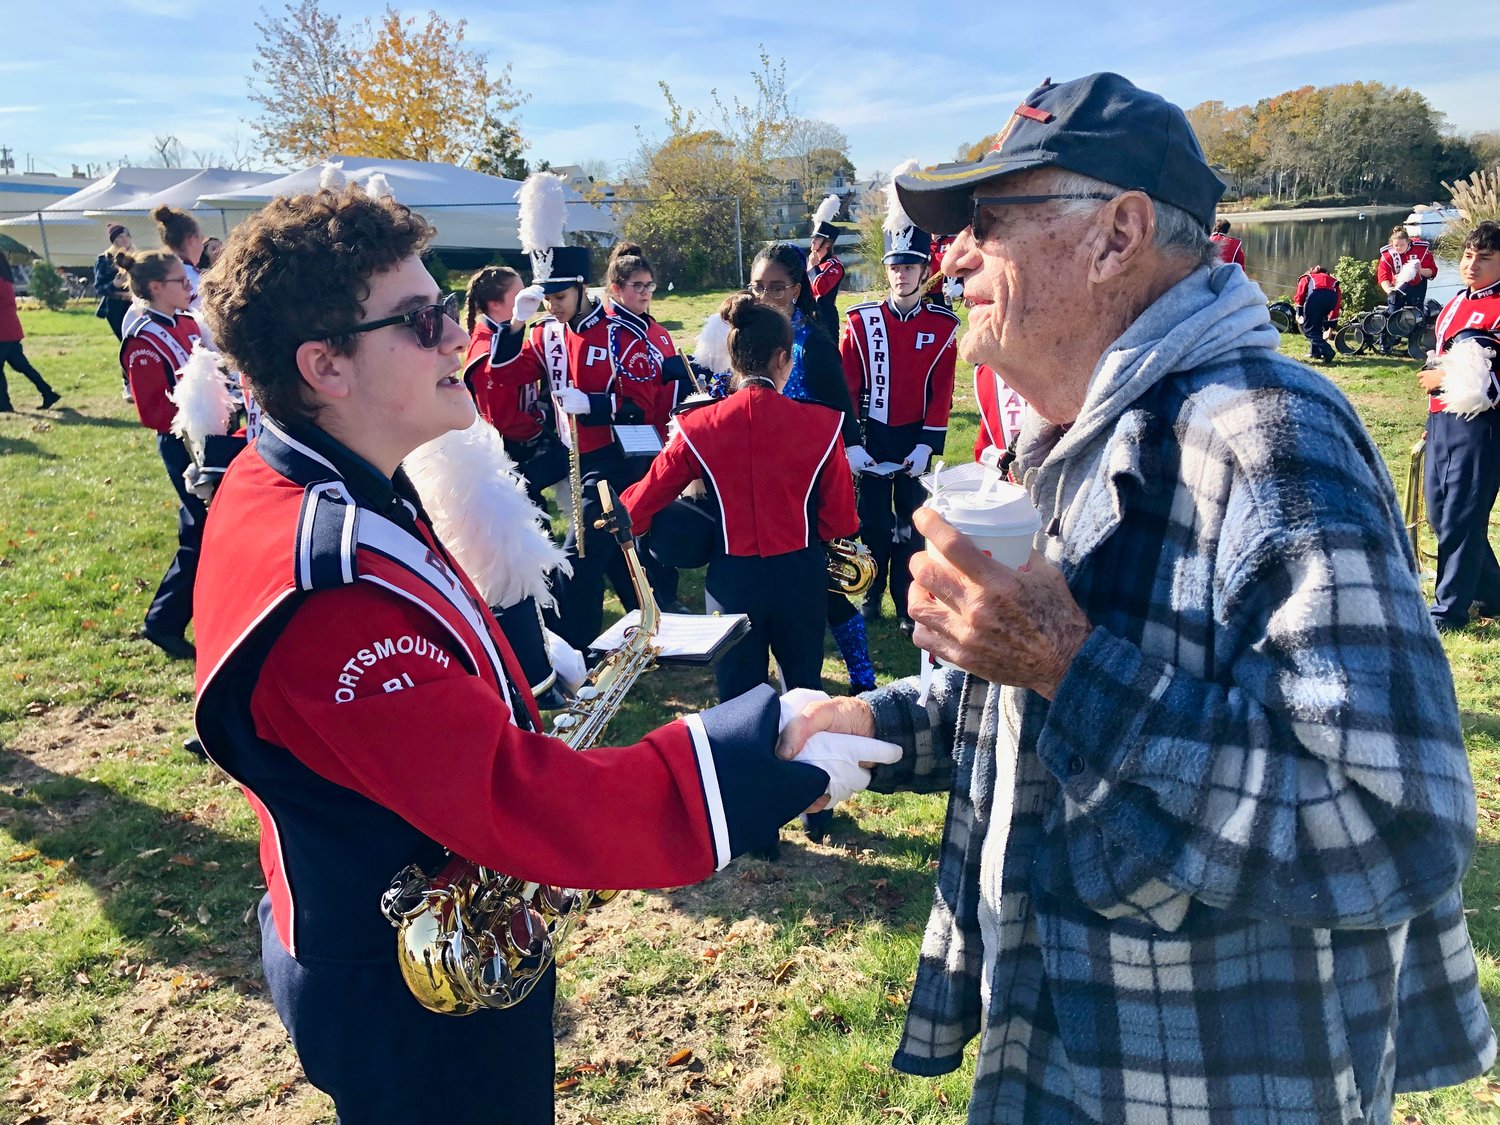 AJ Amaio (left) a senior member of the Portsmouth High School Marching Band, personally thanks Army veteran George Cushman, 90, for his service during a Veterans Day tribute at Thriving Tree Coffee House on Thursday, Nov. 11. Cushman, who regrets having stopped playing piano when he joined the military many years ago, urged band members to always keep playing music throughout their lives.